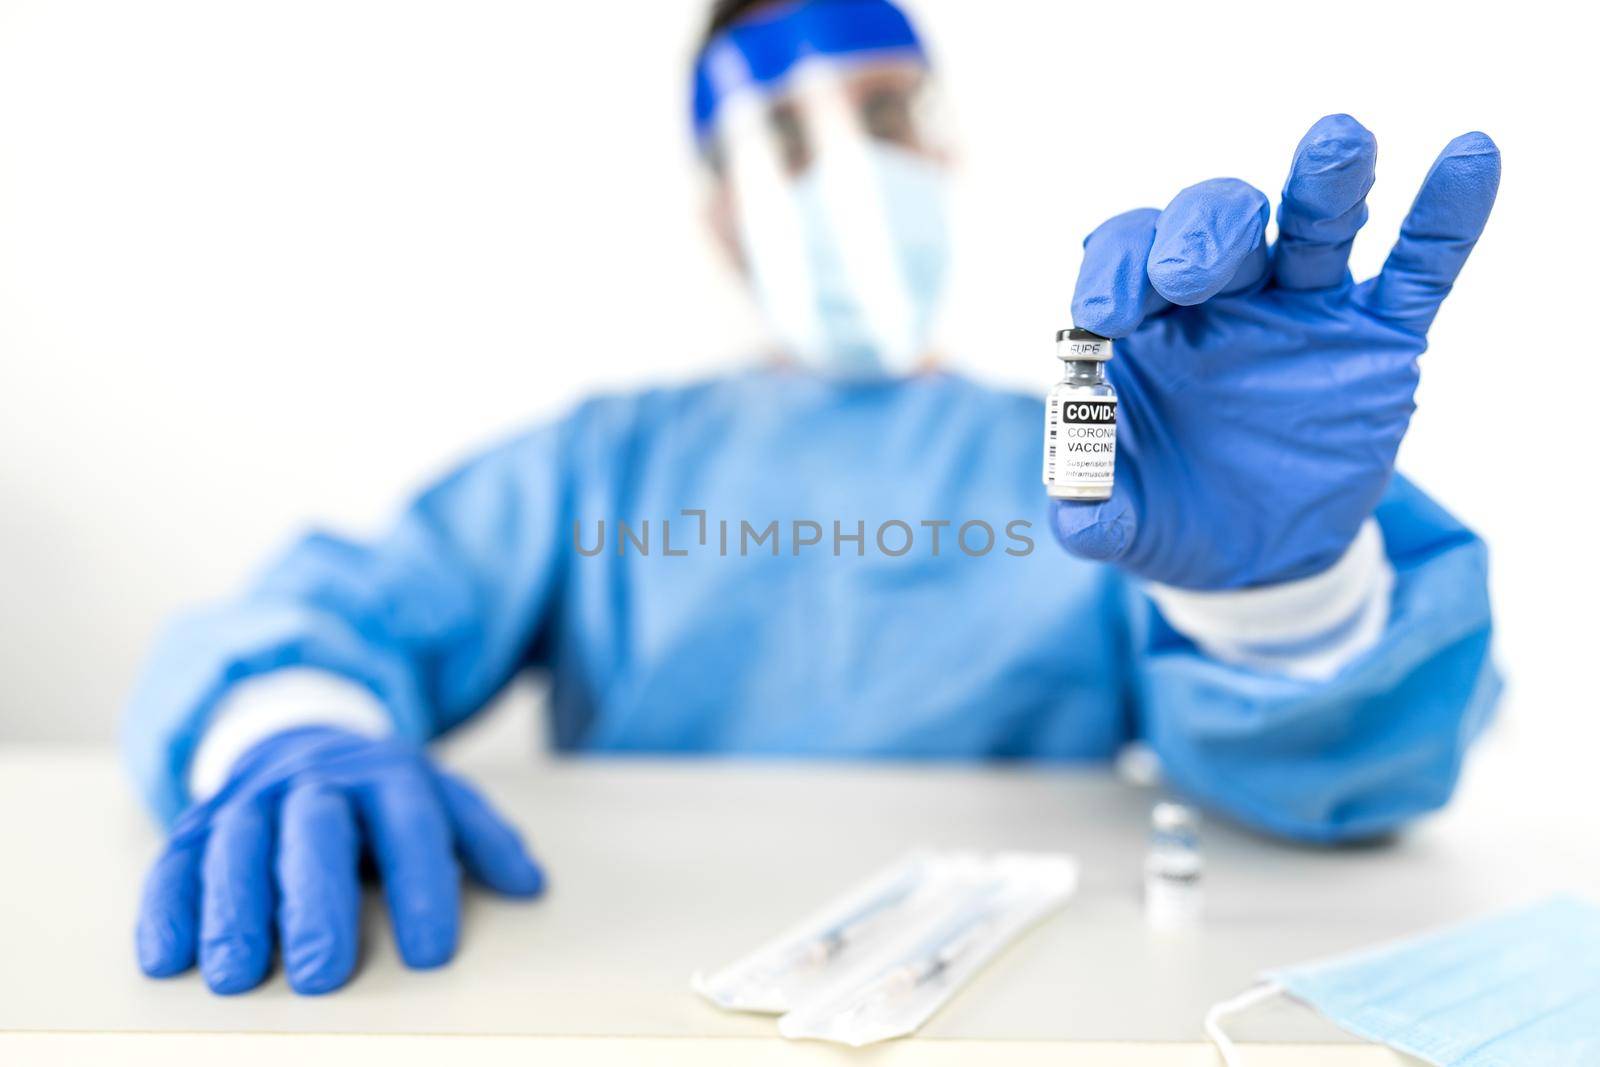 Concept of global vaccination to fight Covid-19 pandemic: medical or health worker in full protection safe kit with blue gloves showing to the camera a vial of Coronavirus vaccine in selective focus